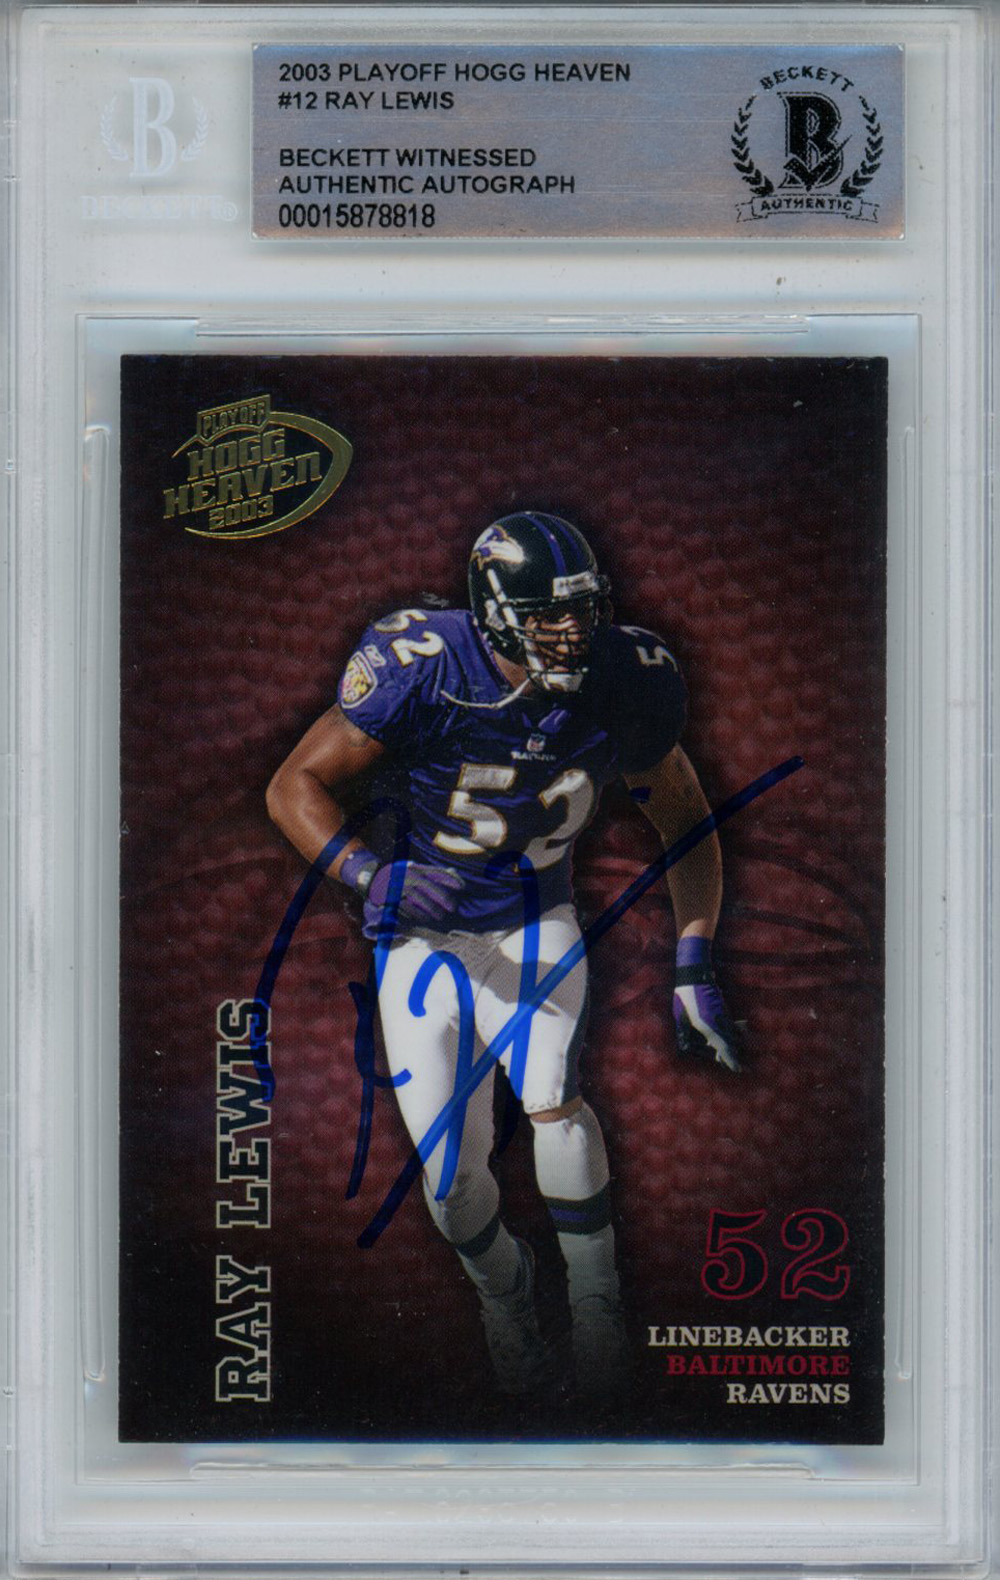 Ray Lewis Signed 2003 Playoff Hogg Heaven #12 Trading Card Beckett Slab